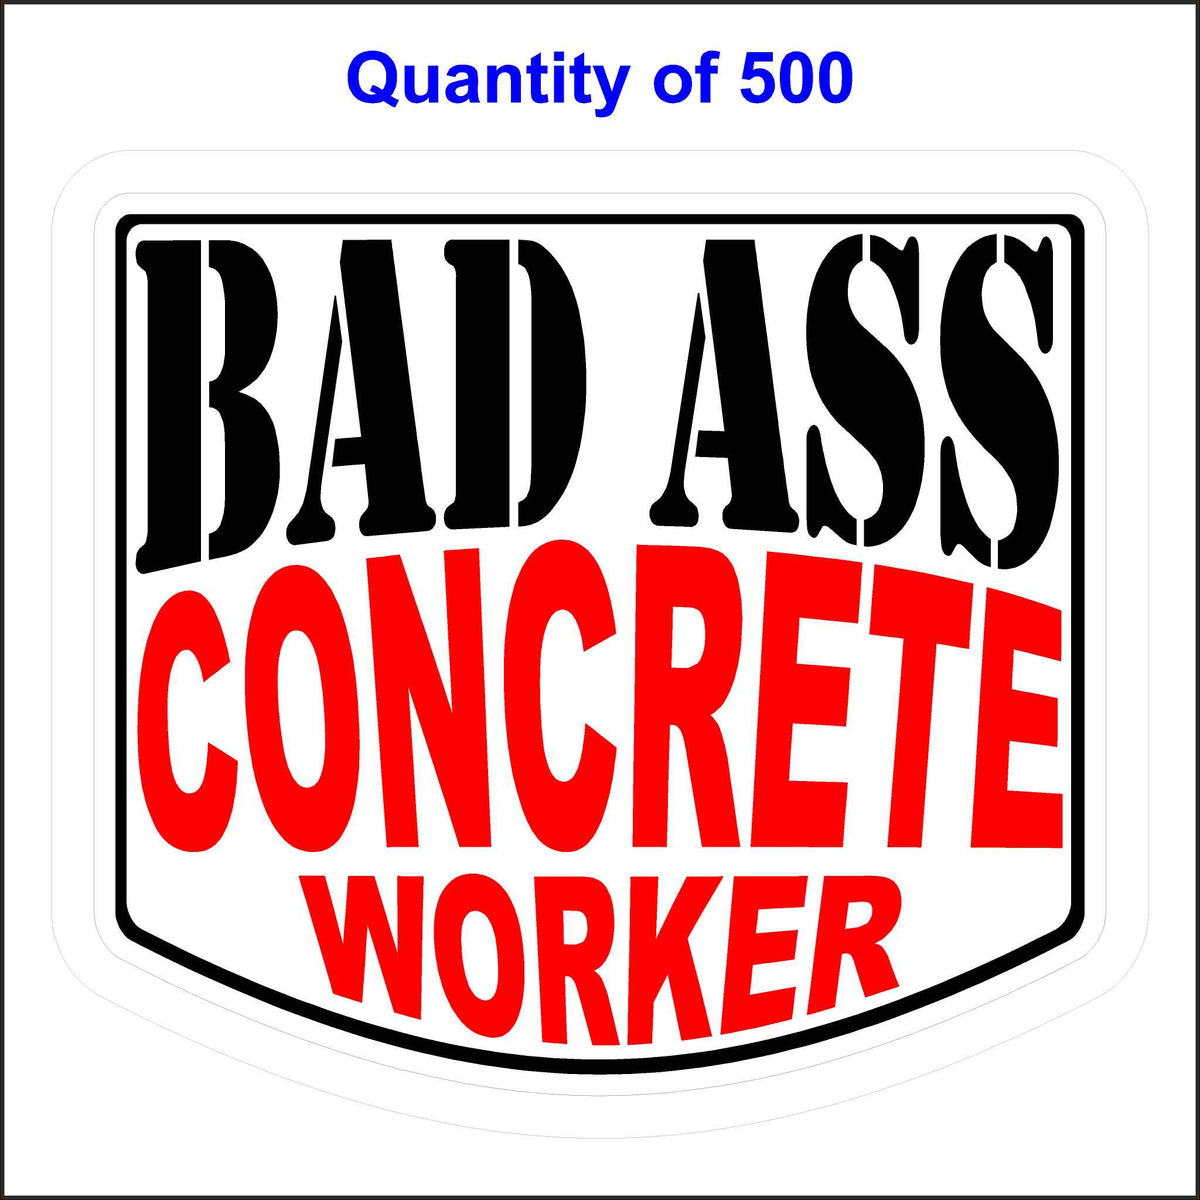 Bad Ass Concrete Worker Stickers 500 Quantity.